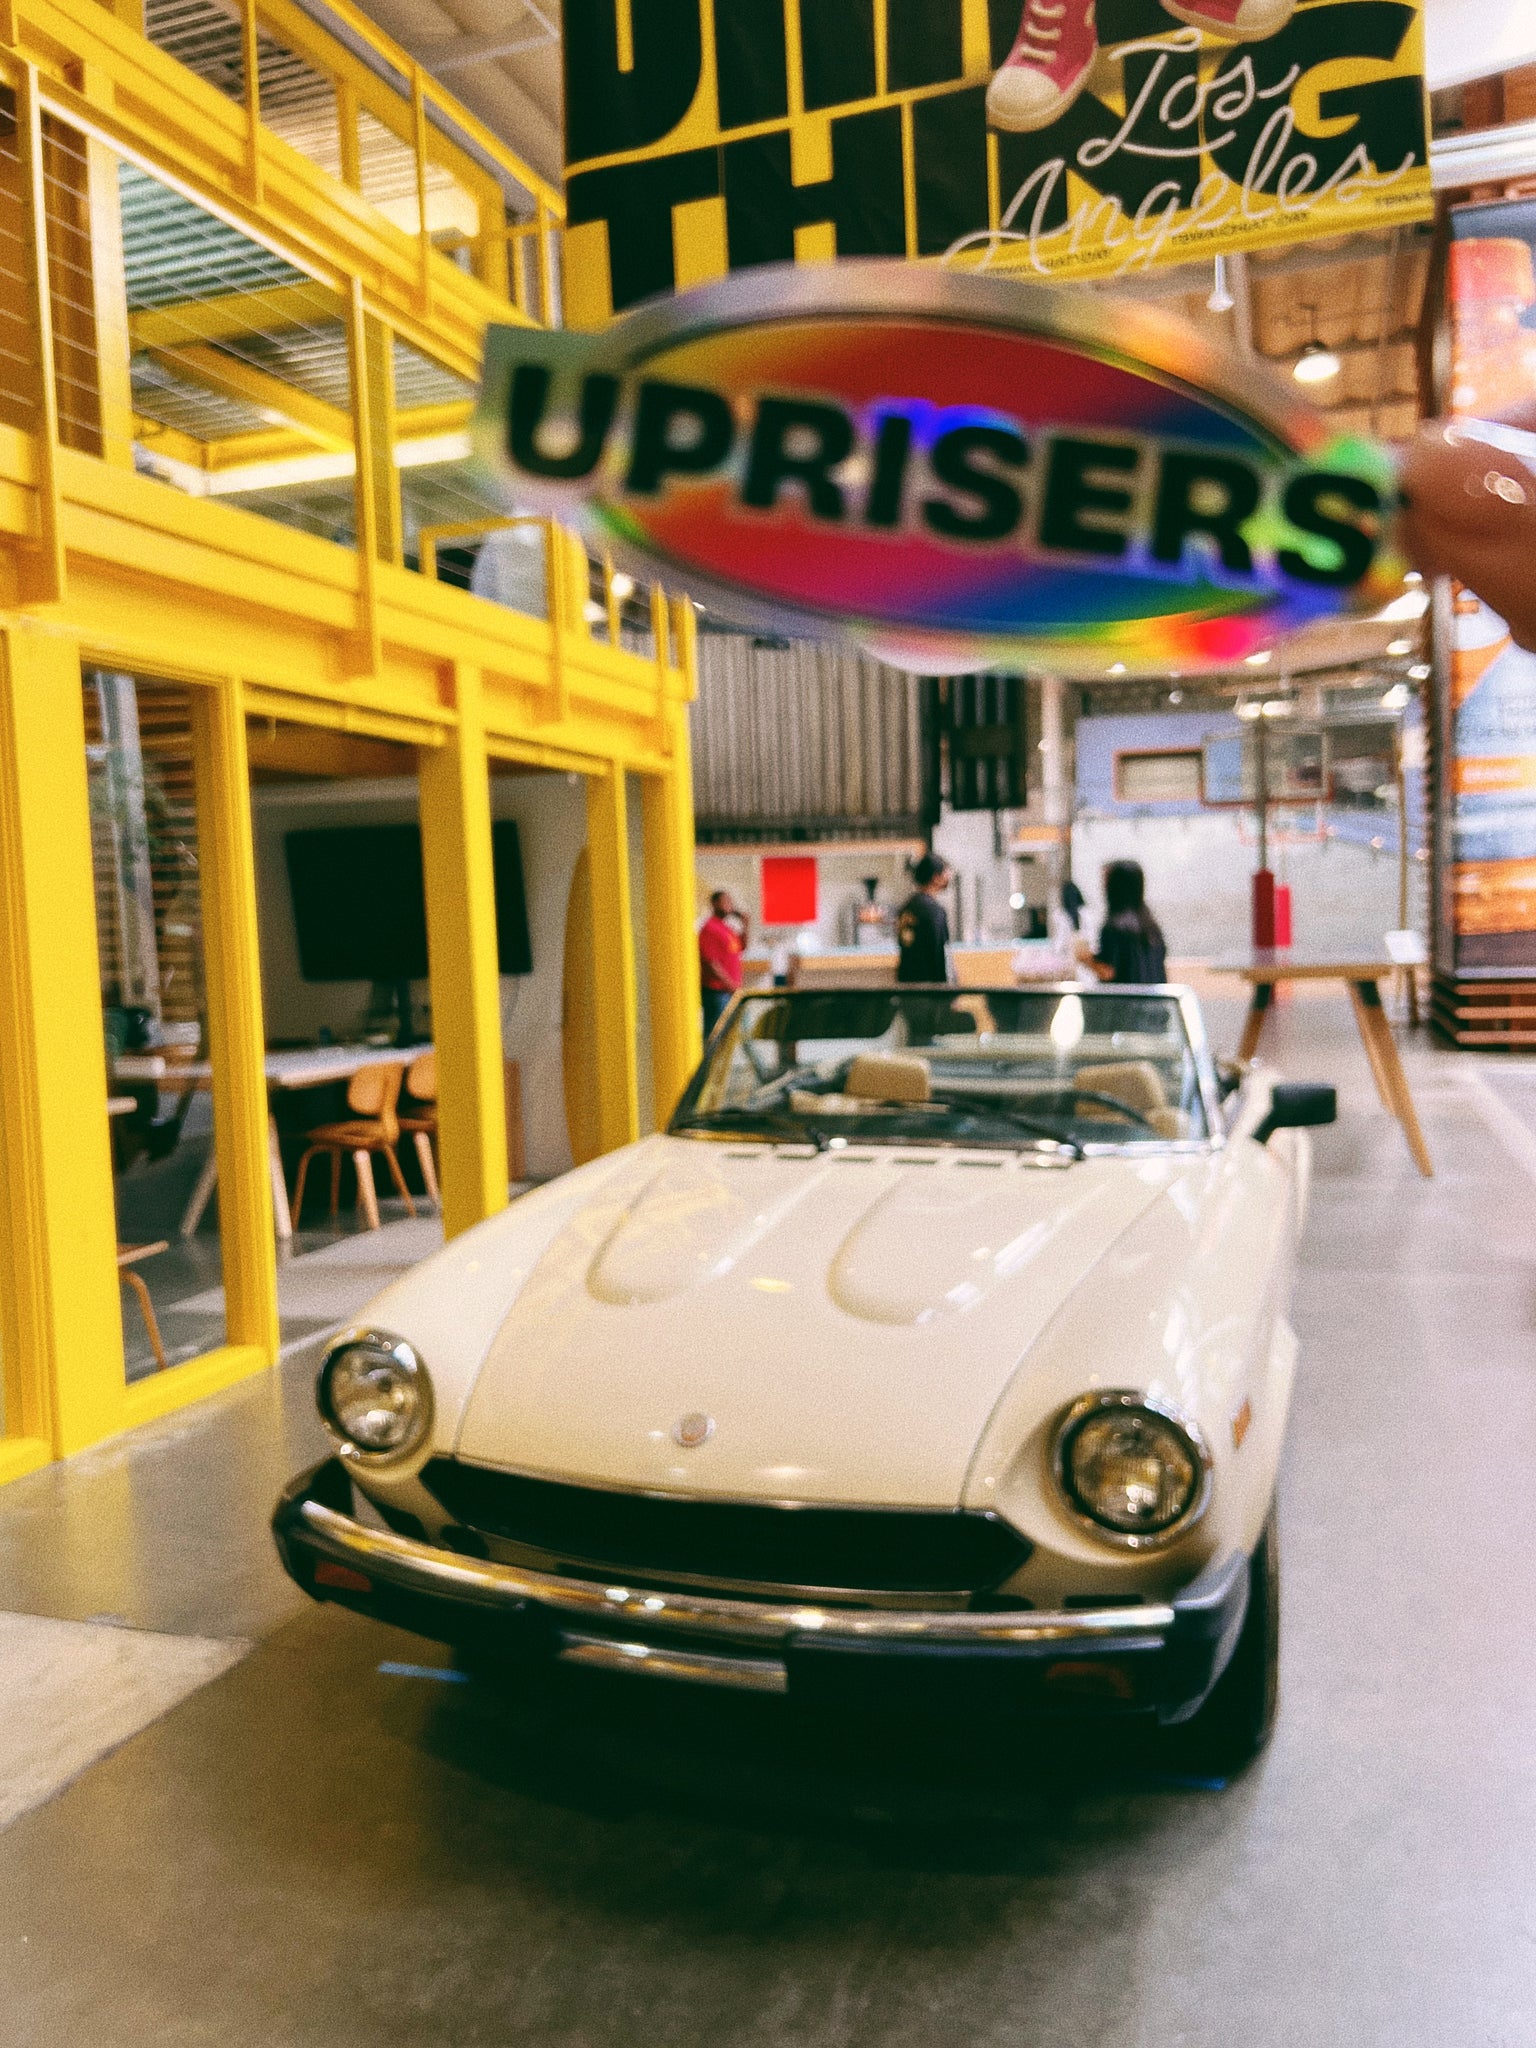 UPRISERS pop-up at the TBWA\CHIAT\DAY office for AAPIHM